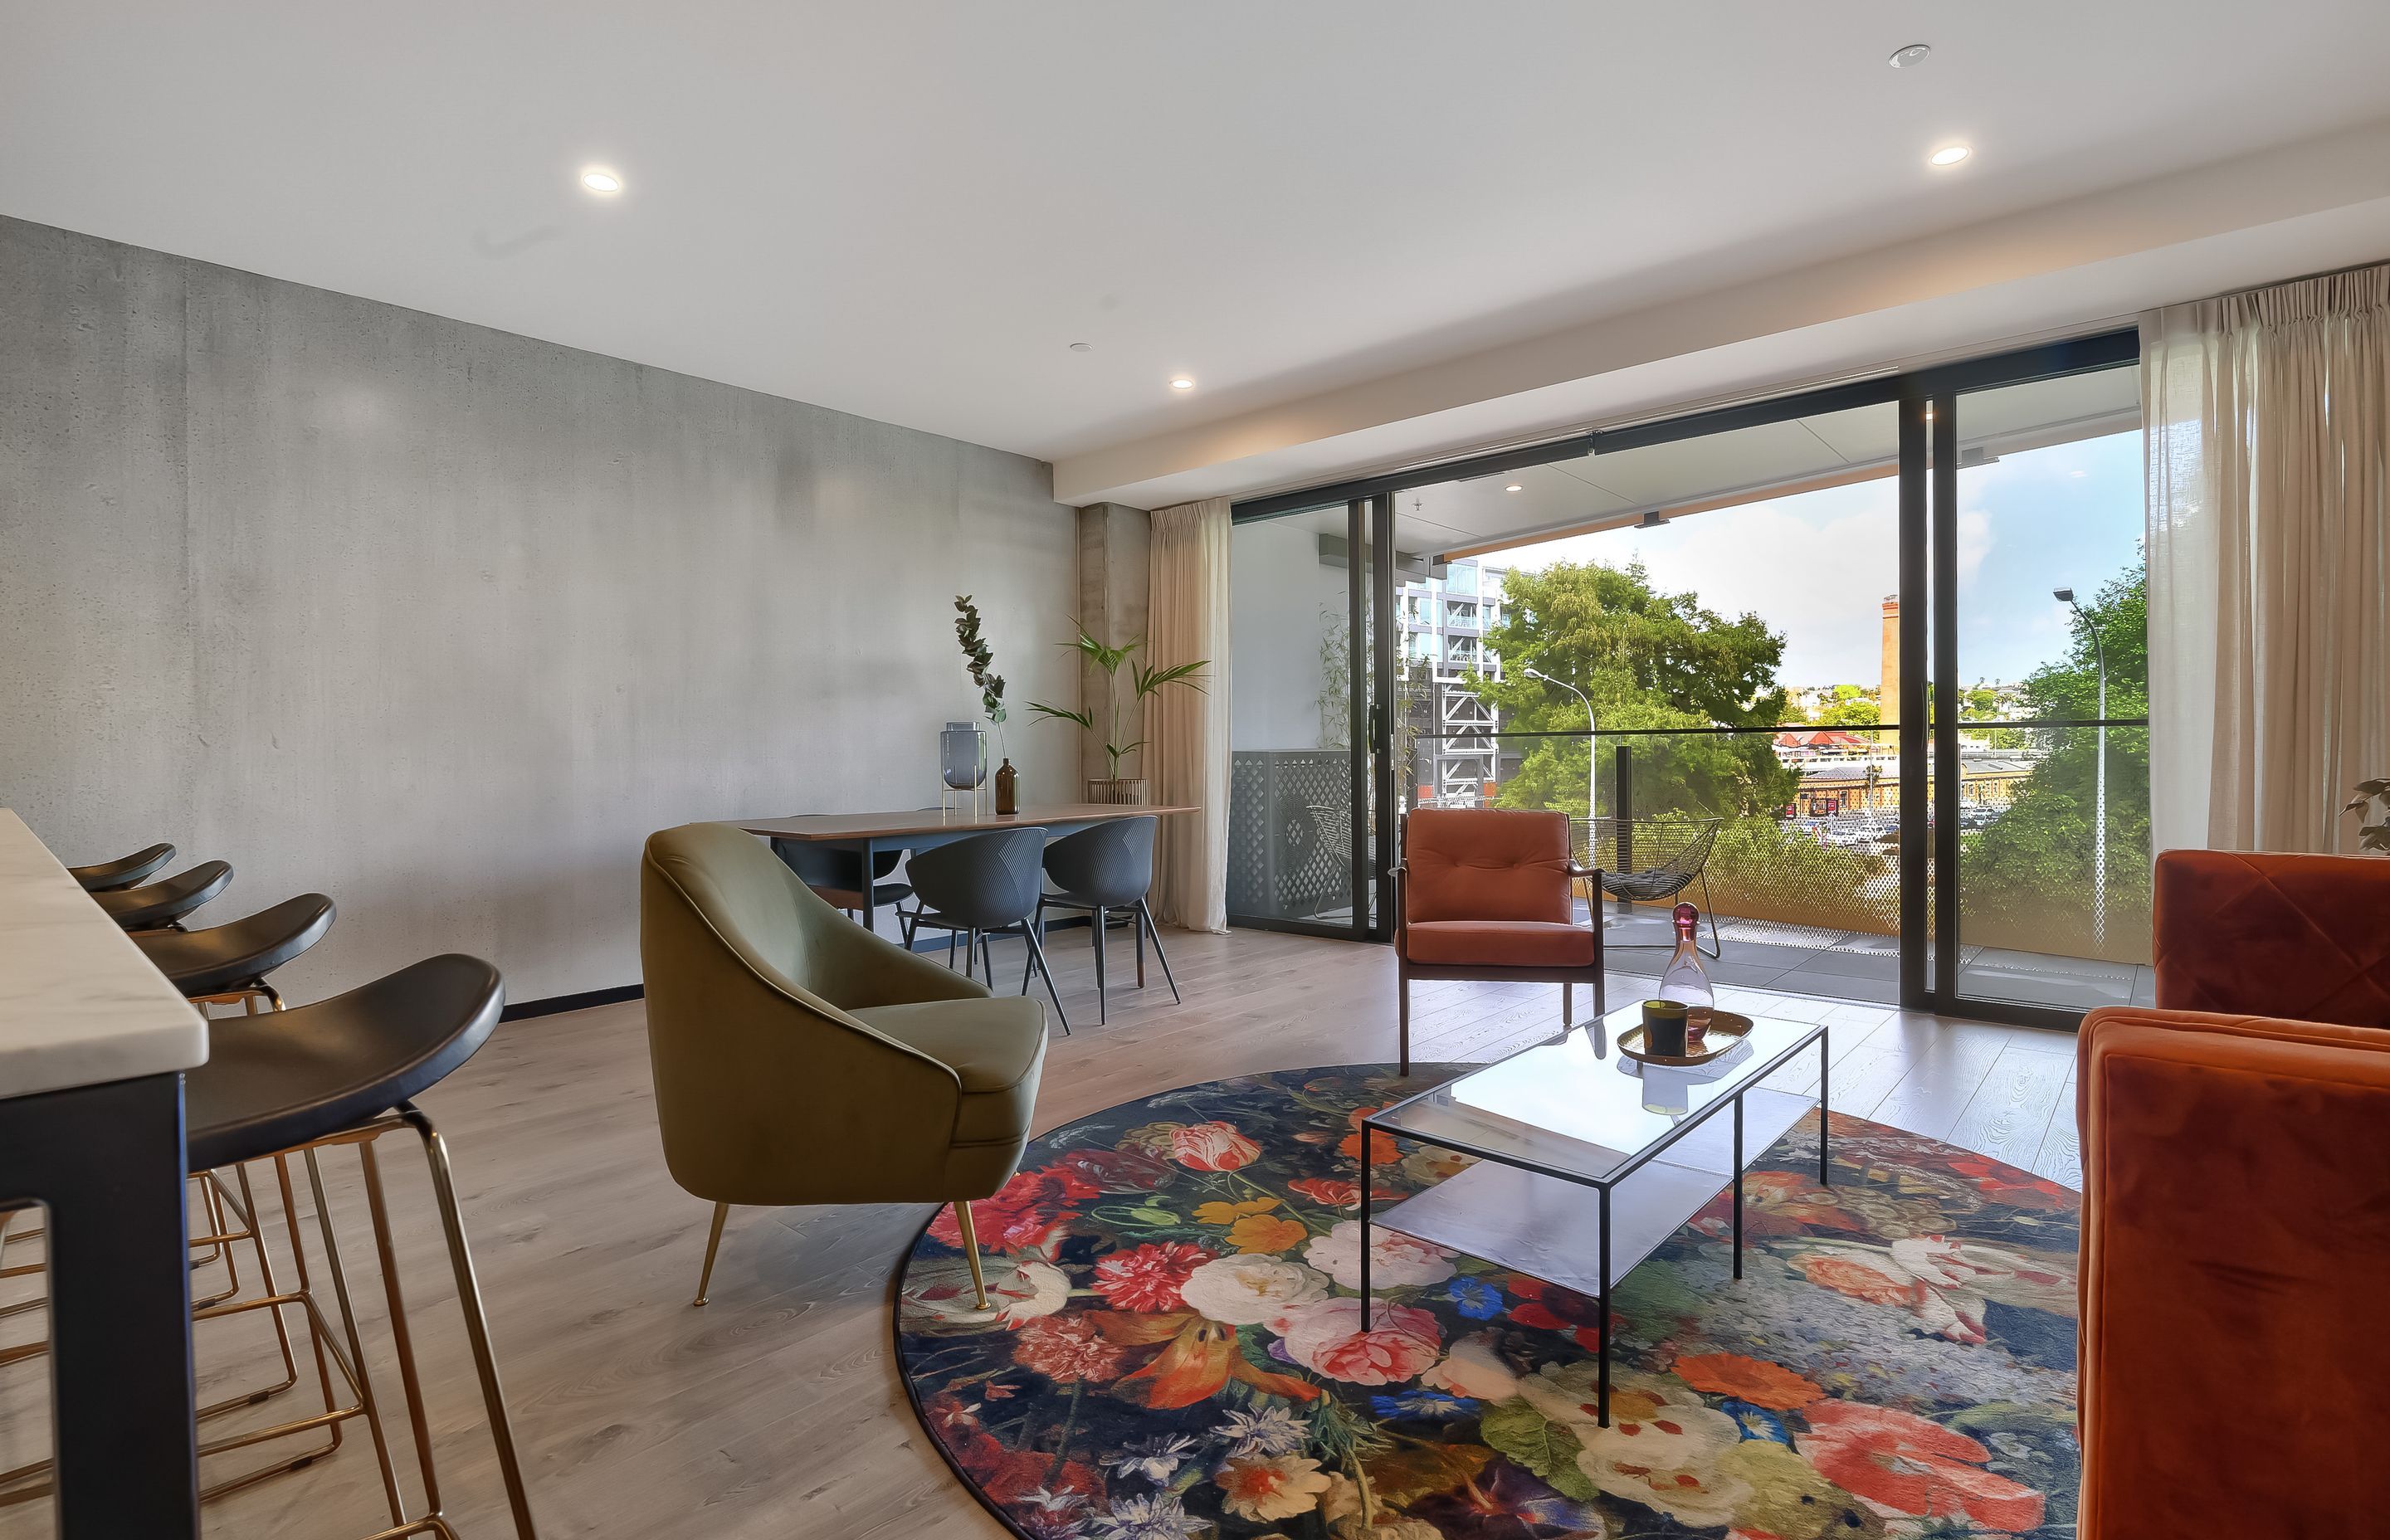 Full-height, full-width glazing is a feature of the park-facing apartments, bringing the outdoors to the fore and complementing the pared back palette.